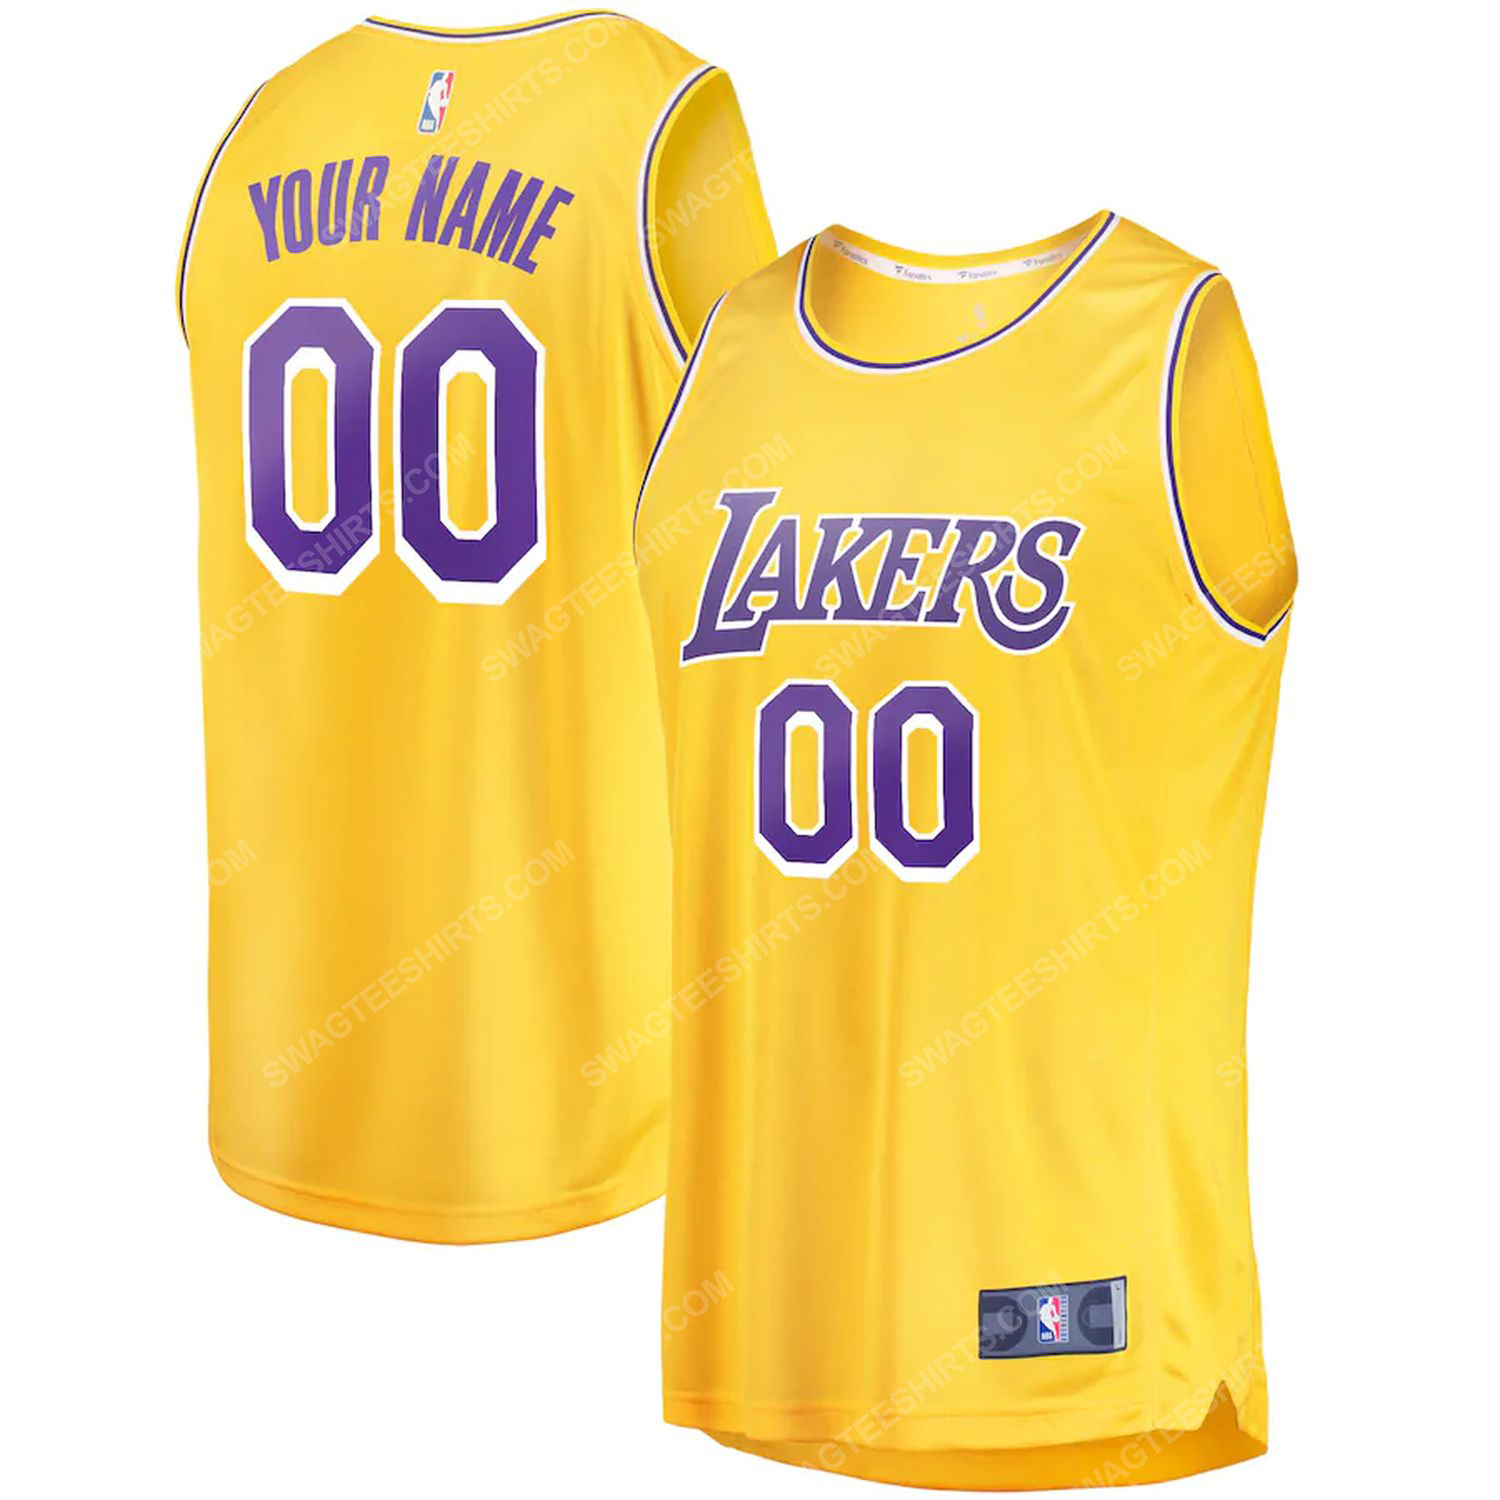 Custom nba los angeles lakers team basketball jersey-gold-icon edition - Copy (2)